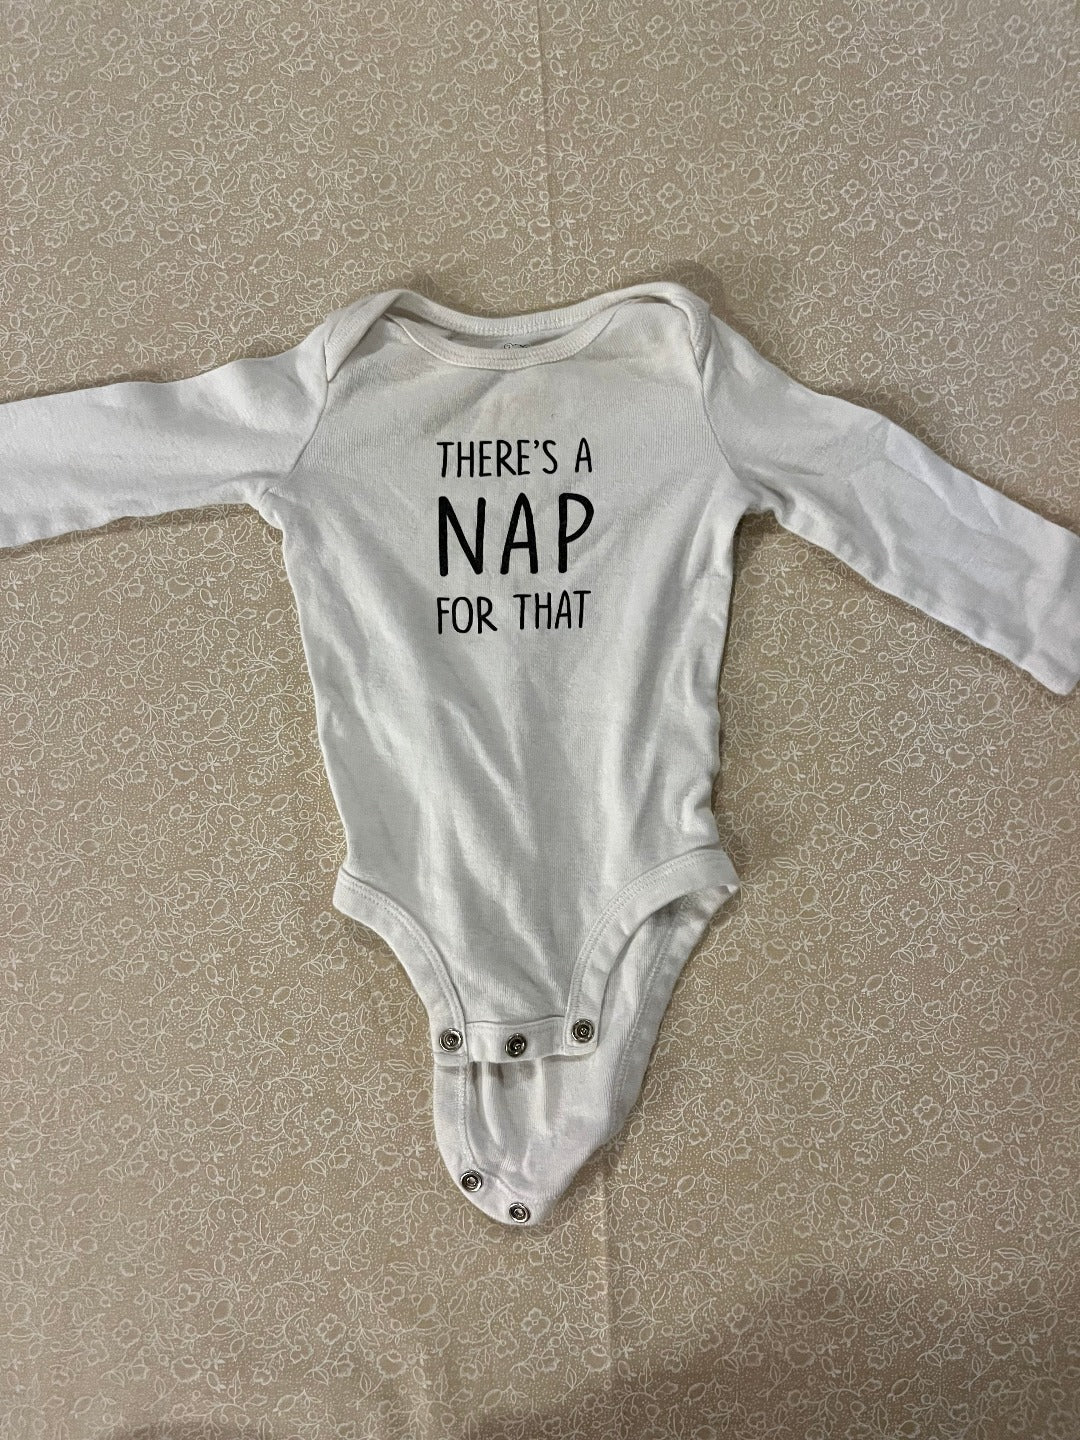 3-6-month-shirt-koala-baby-long-sleeve-theres-a-nap-for-that